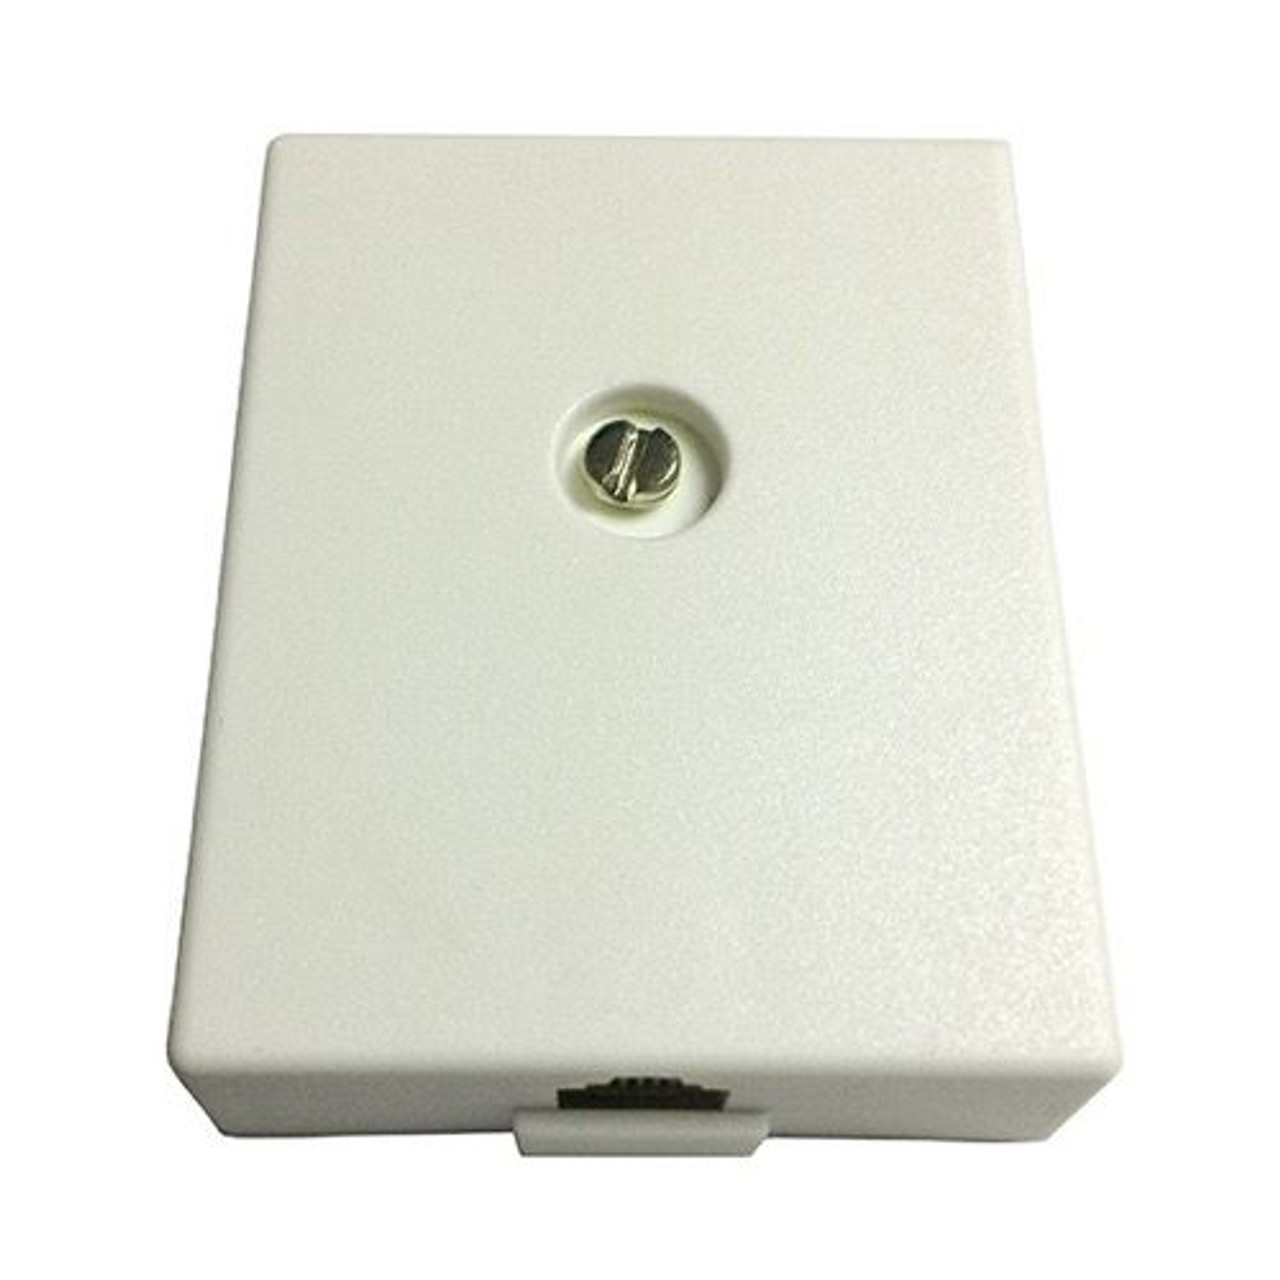 Surface Mount Wall Jack Phone Block White Leviton C0255-W Phone Line Junction Block 10 Pack Modular Telephone 4 Wire Conductor J-Box Line Plug Jack Cover, Part # C0255W